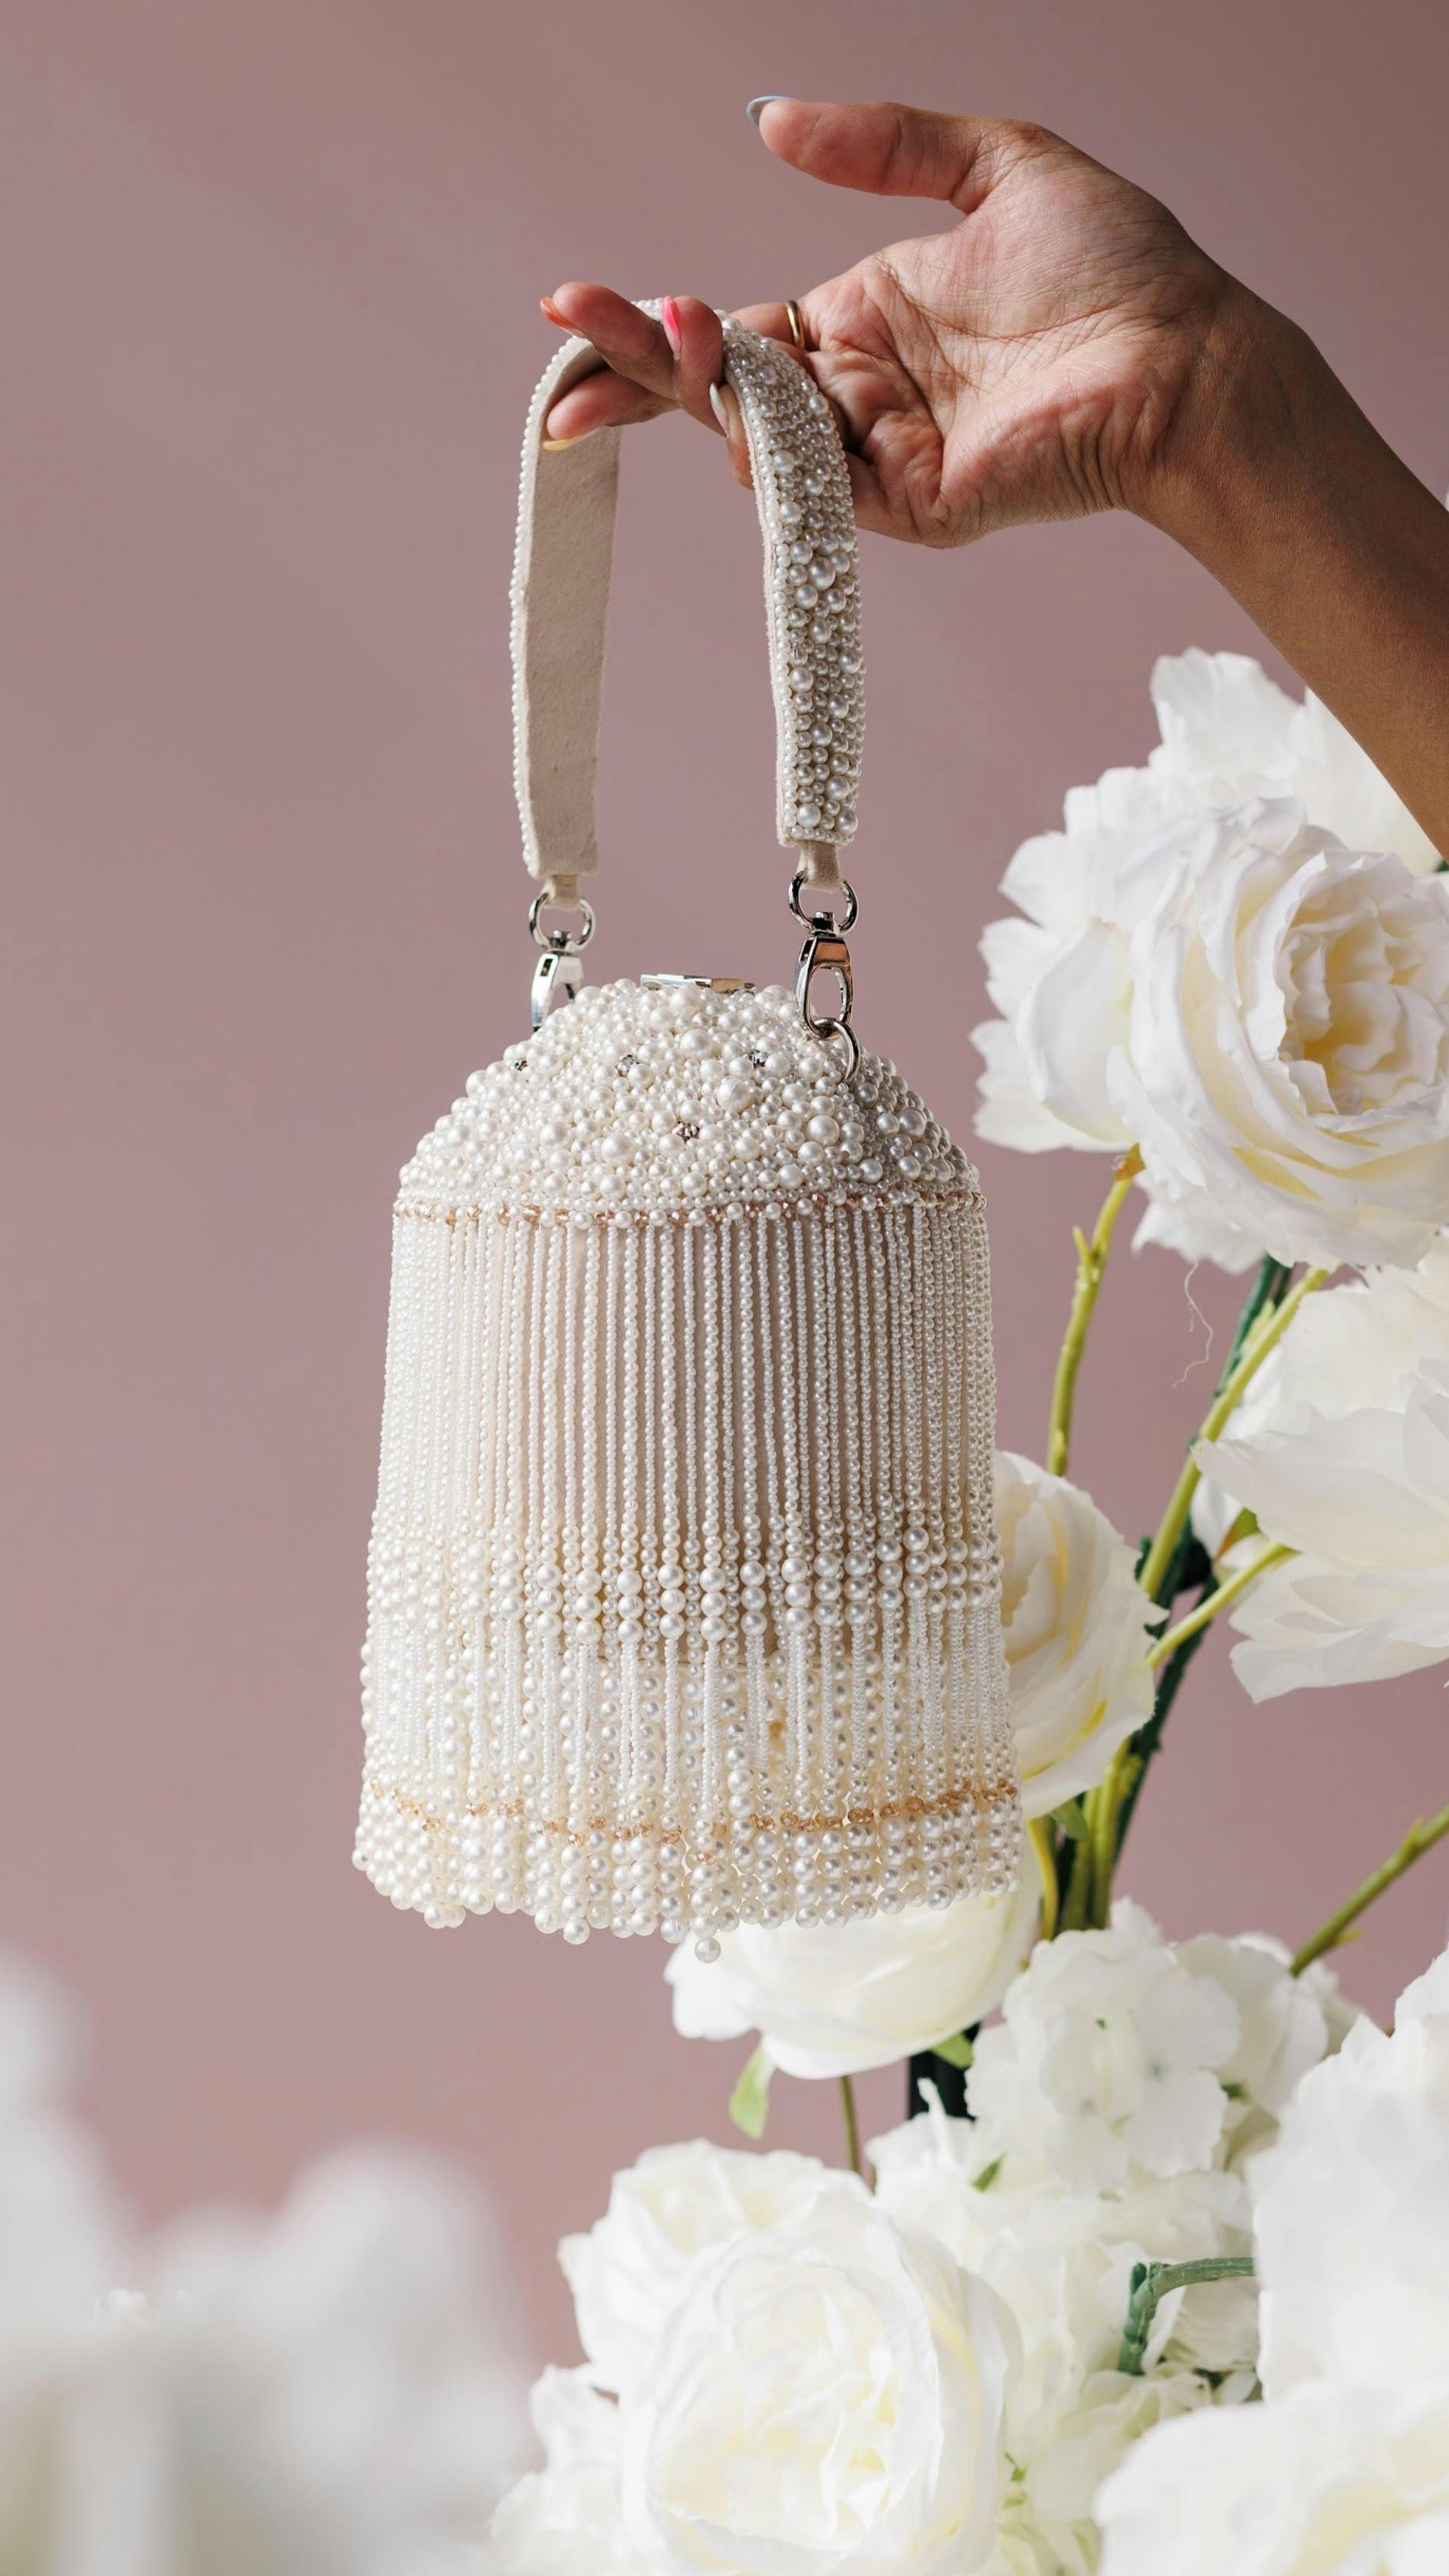 GLAMOUR Pearl Bucket Bag, a product by Clutcheeet